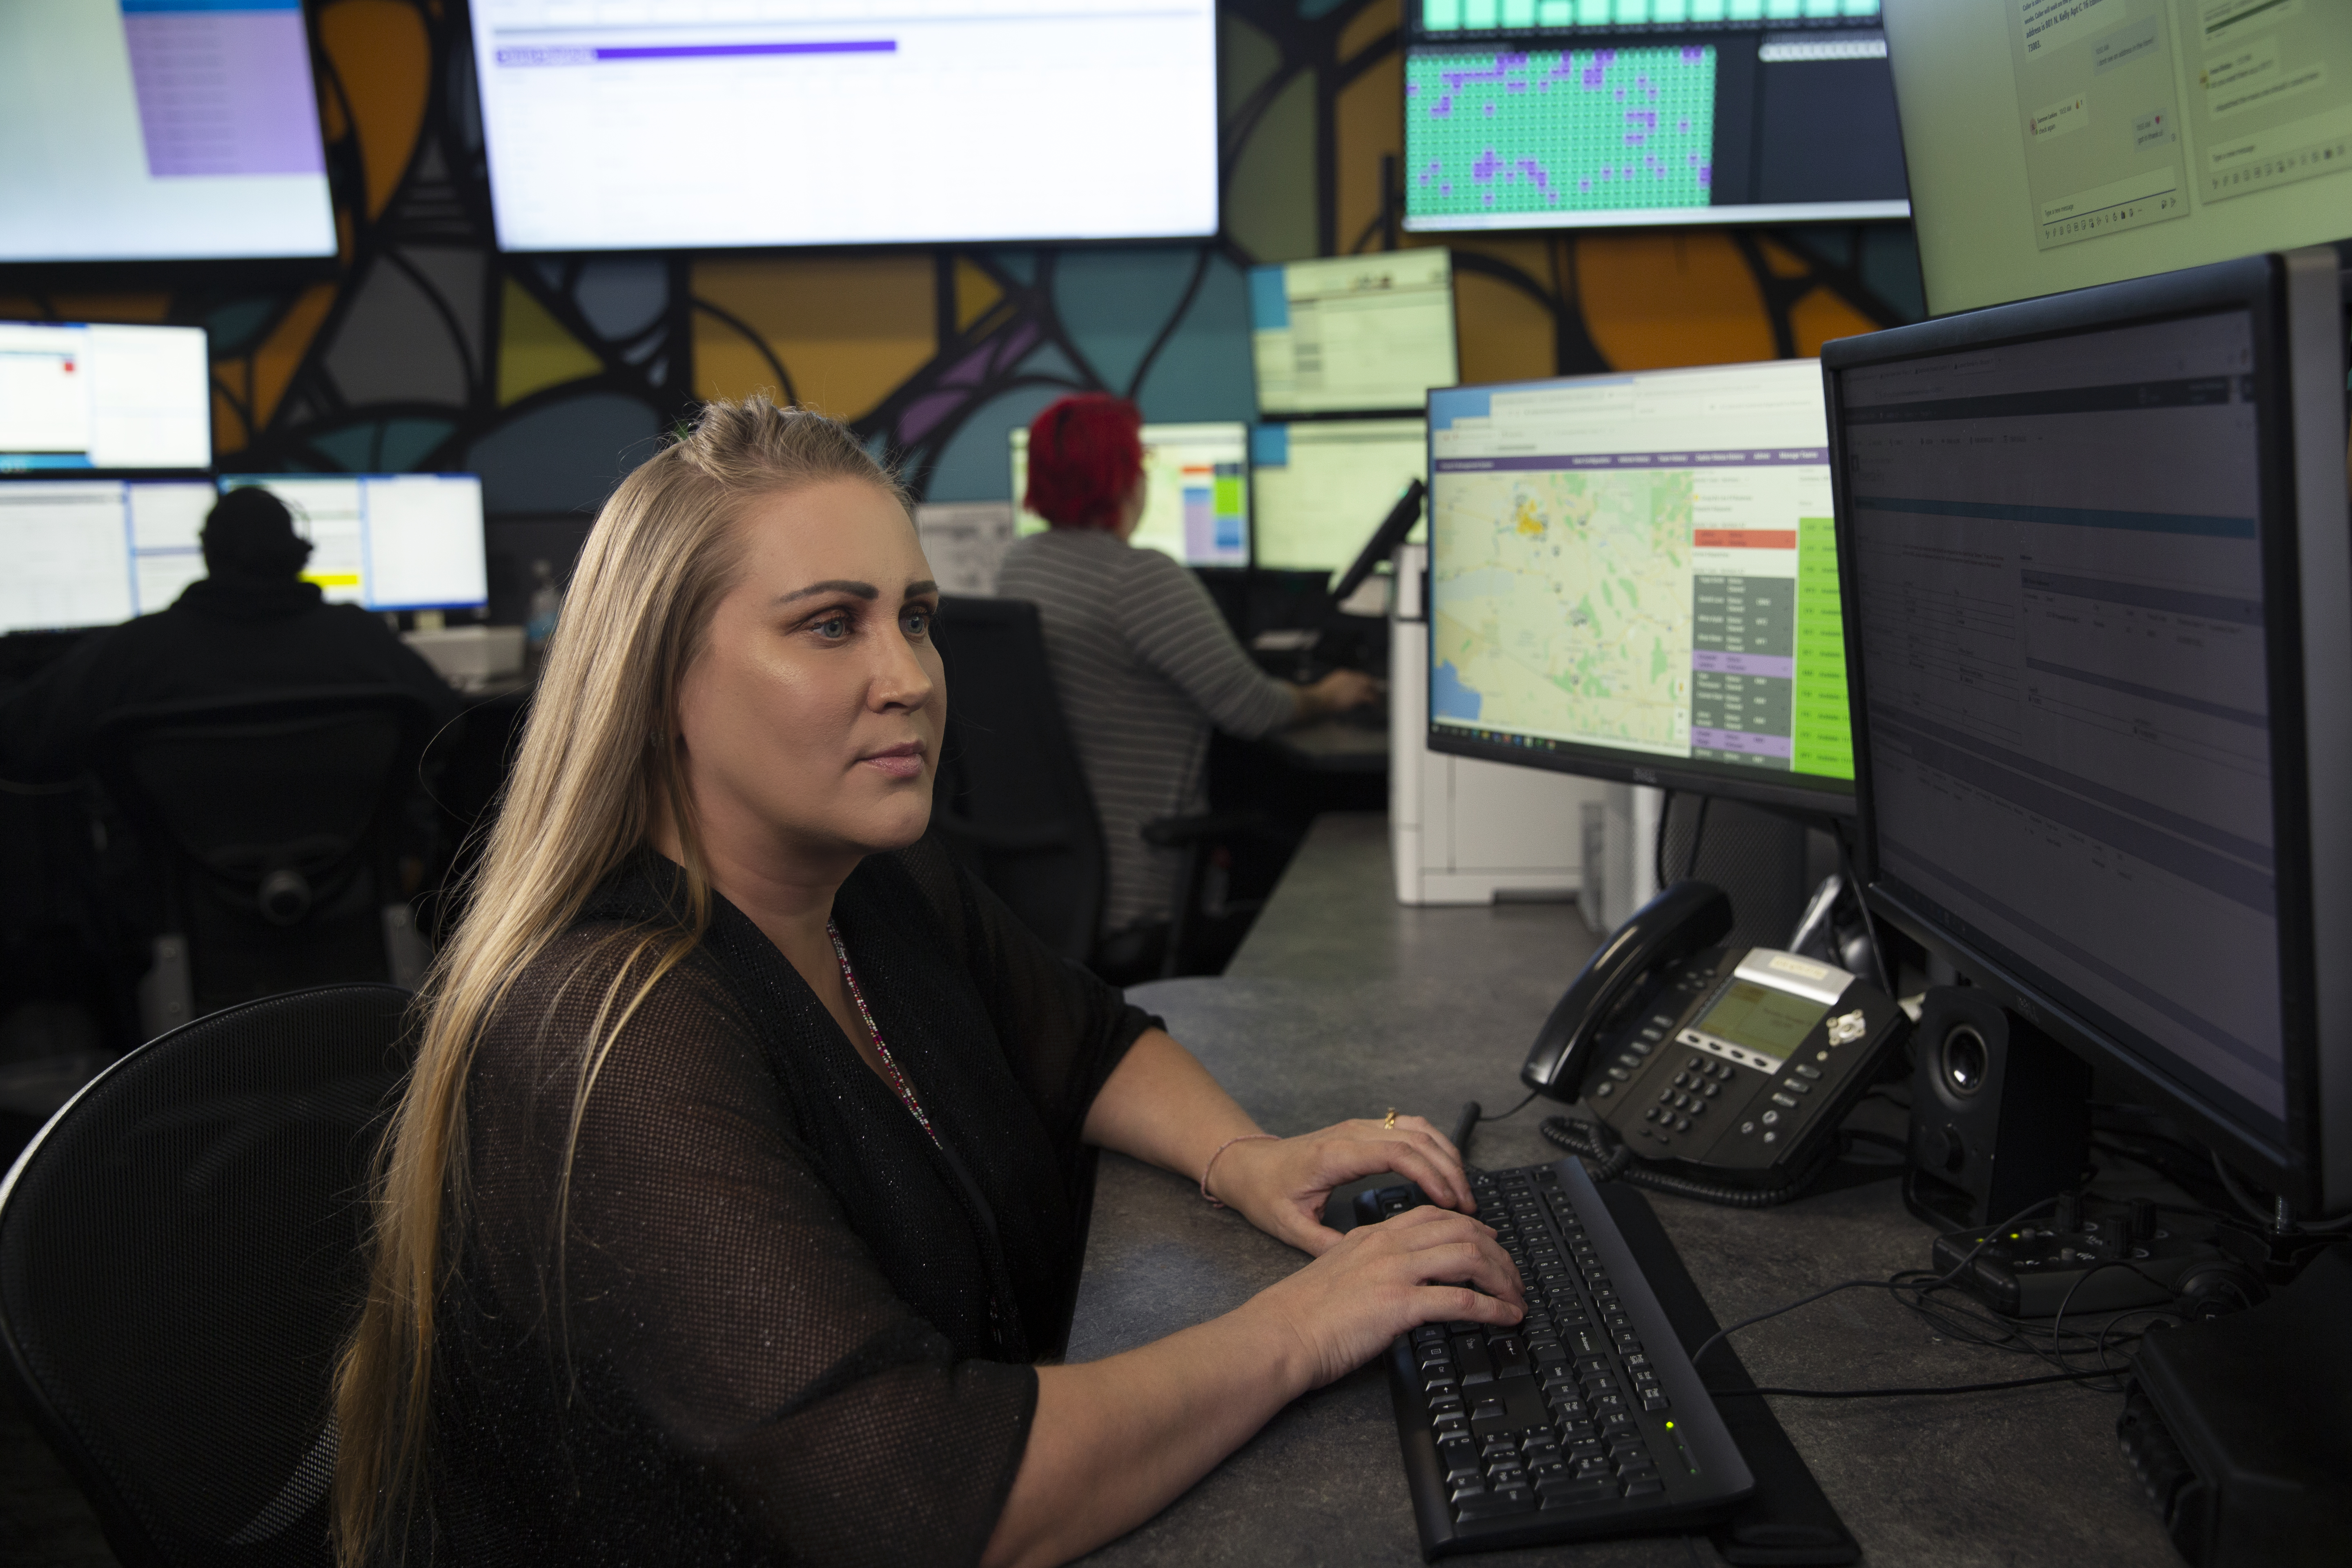 A crisis line worker sits in front of several computer screens ready to assist a caller.